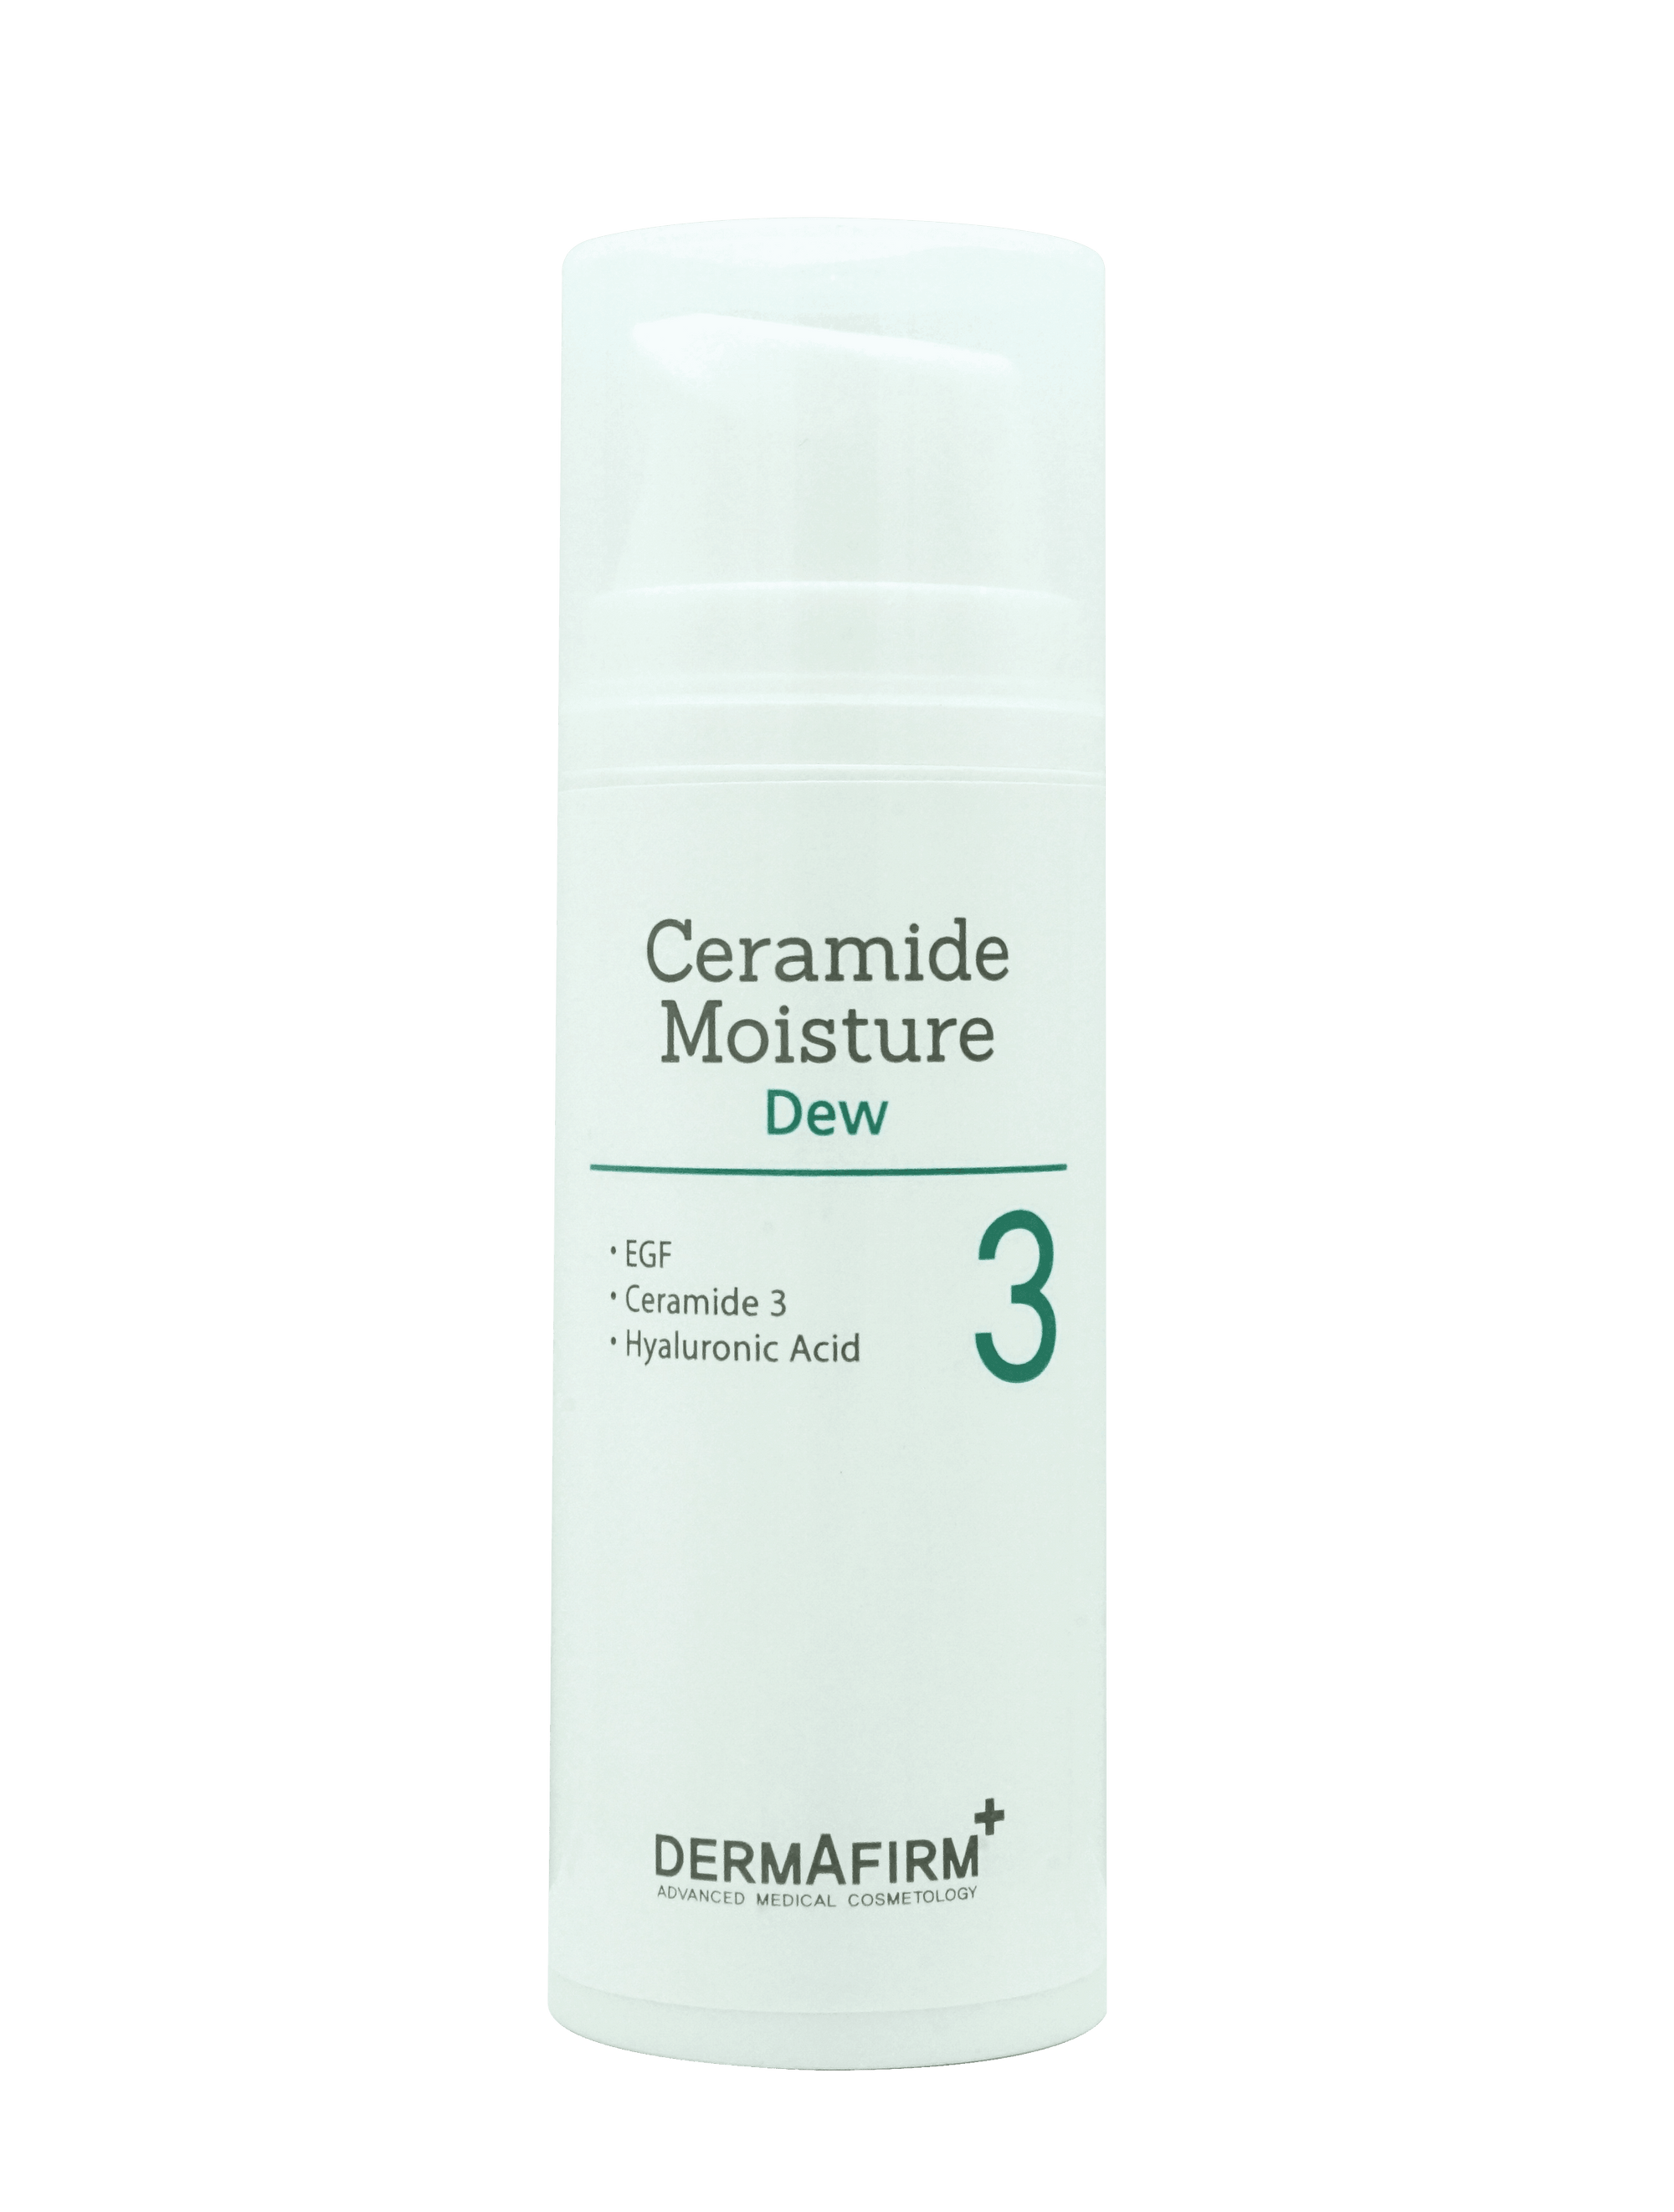 What is a Ceramide and what does it do to my skin? - Dermafirm USA